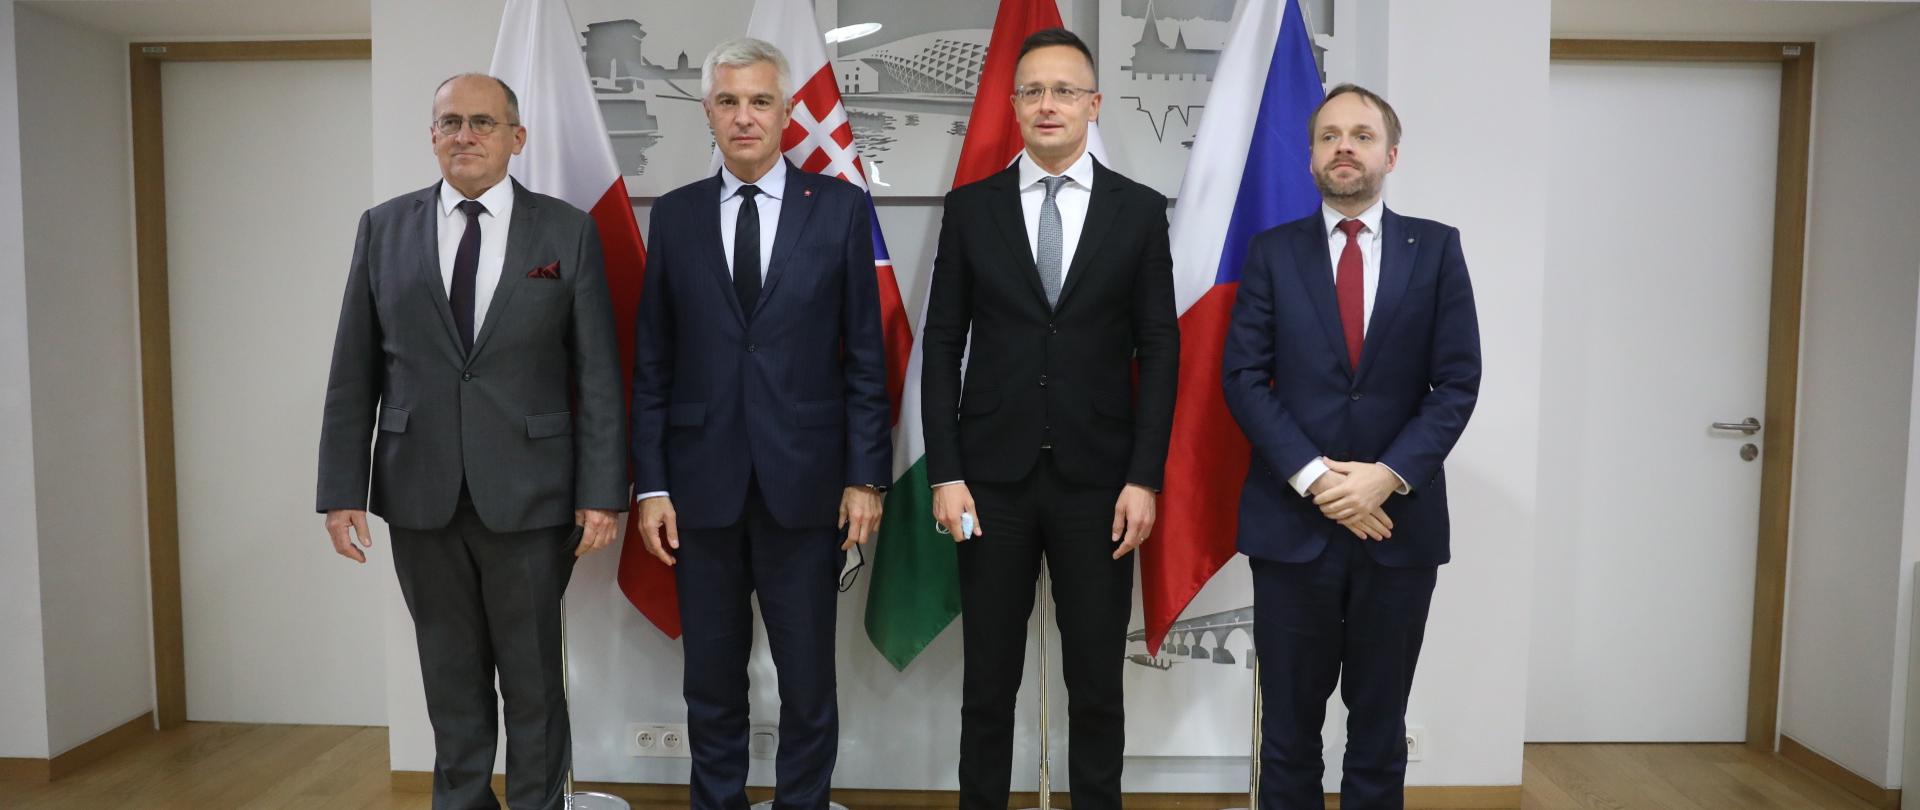 Minister Zbigniew Rau among the representatives of the Visegrad Group